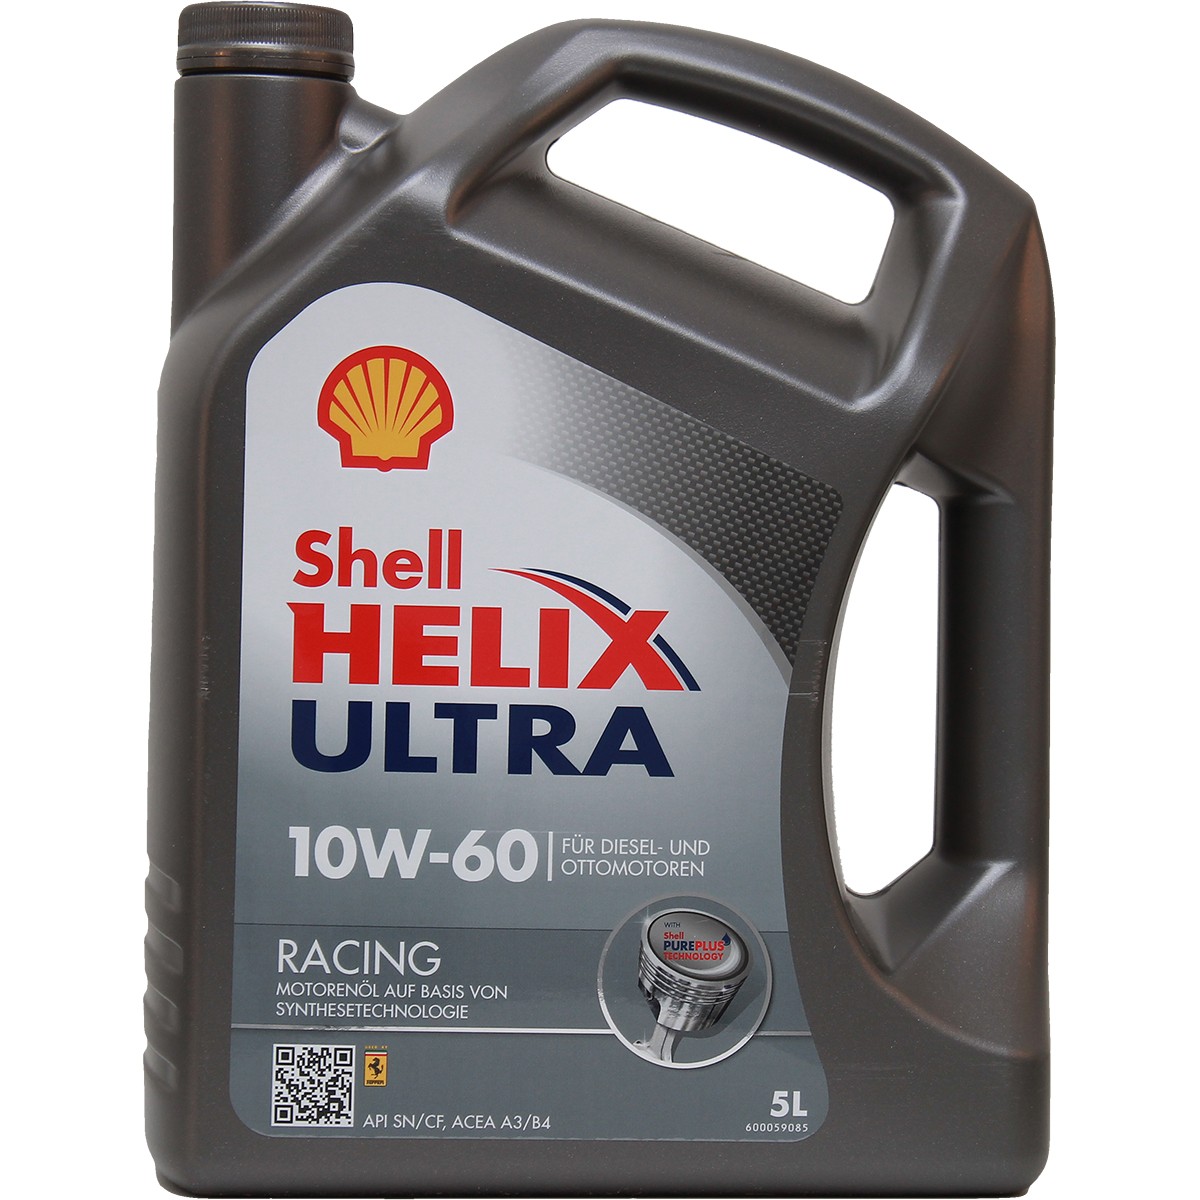 Auto oil 10W60 longlife diesel - 550040761 SHELL Helix, Ultra Racing